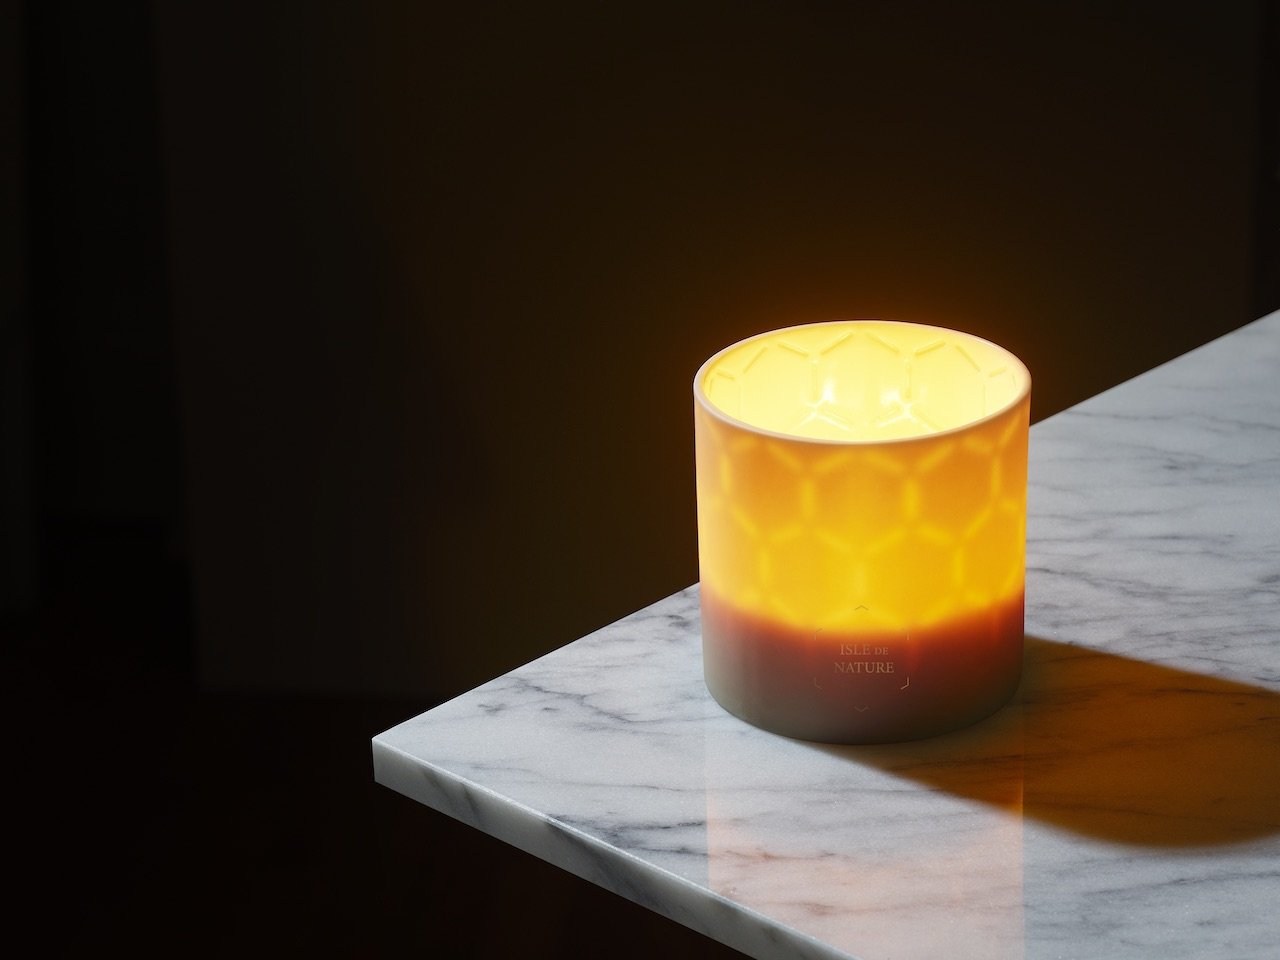 Pagua Bay Fragrance Luxury Beeswax Candle by Isle de Nature